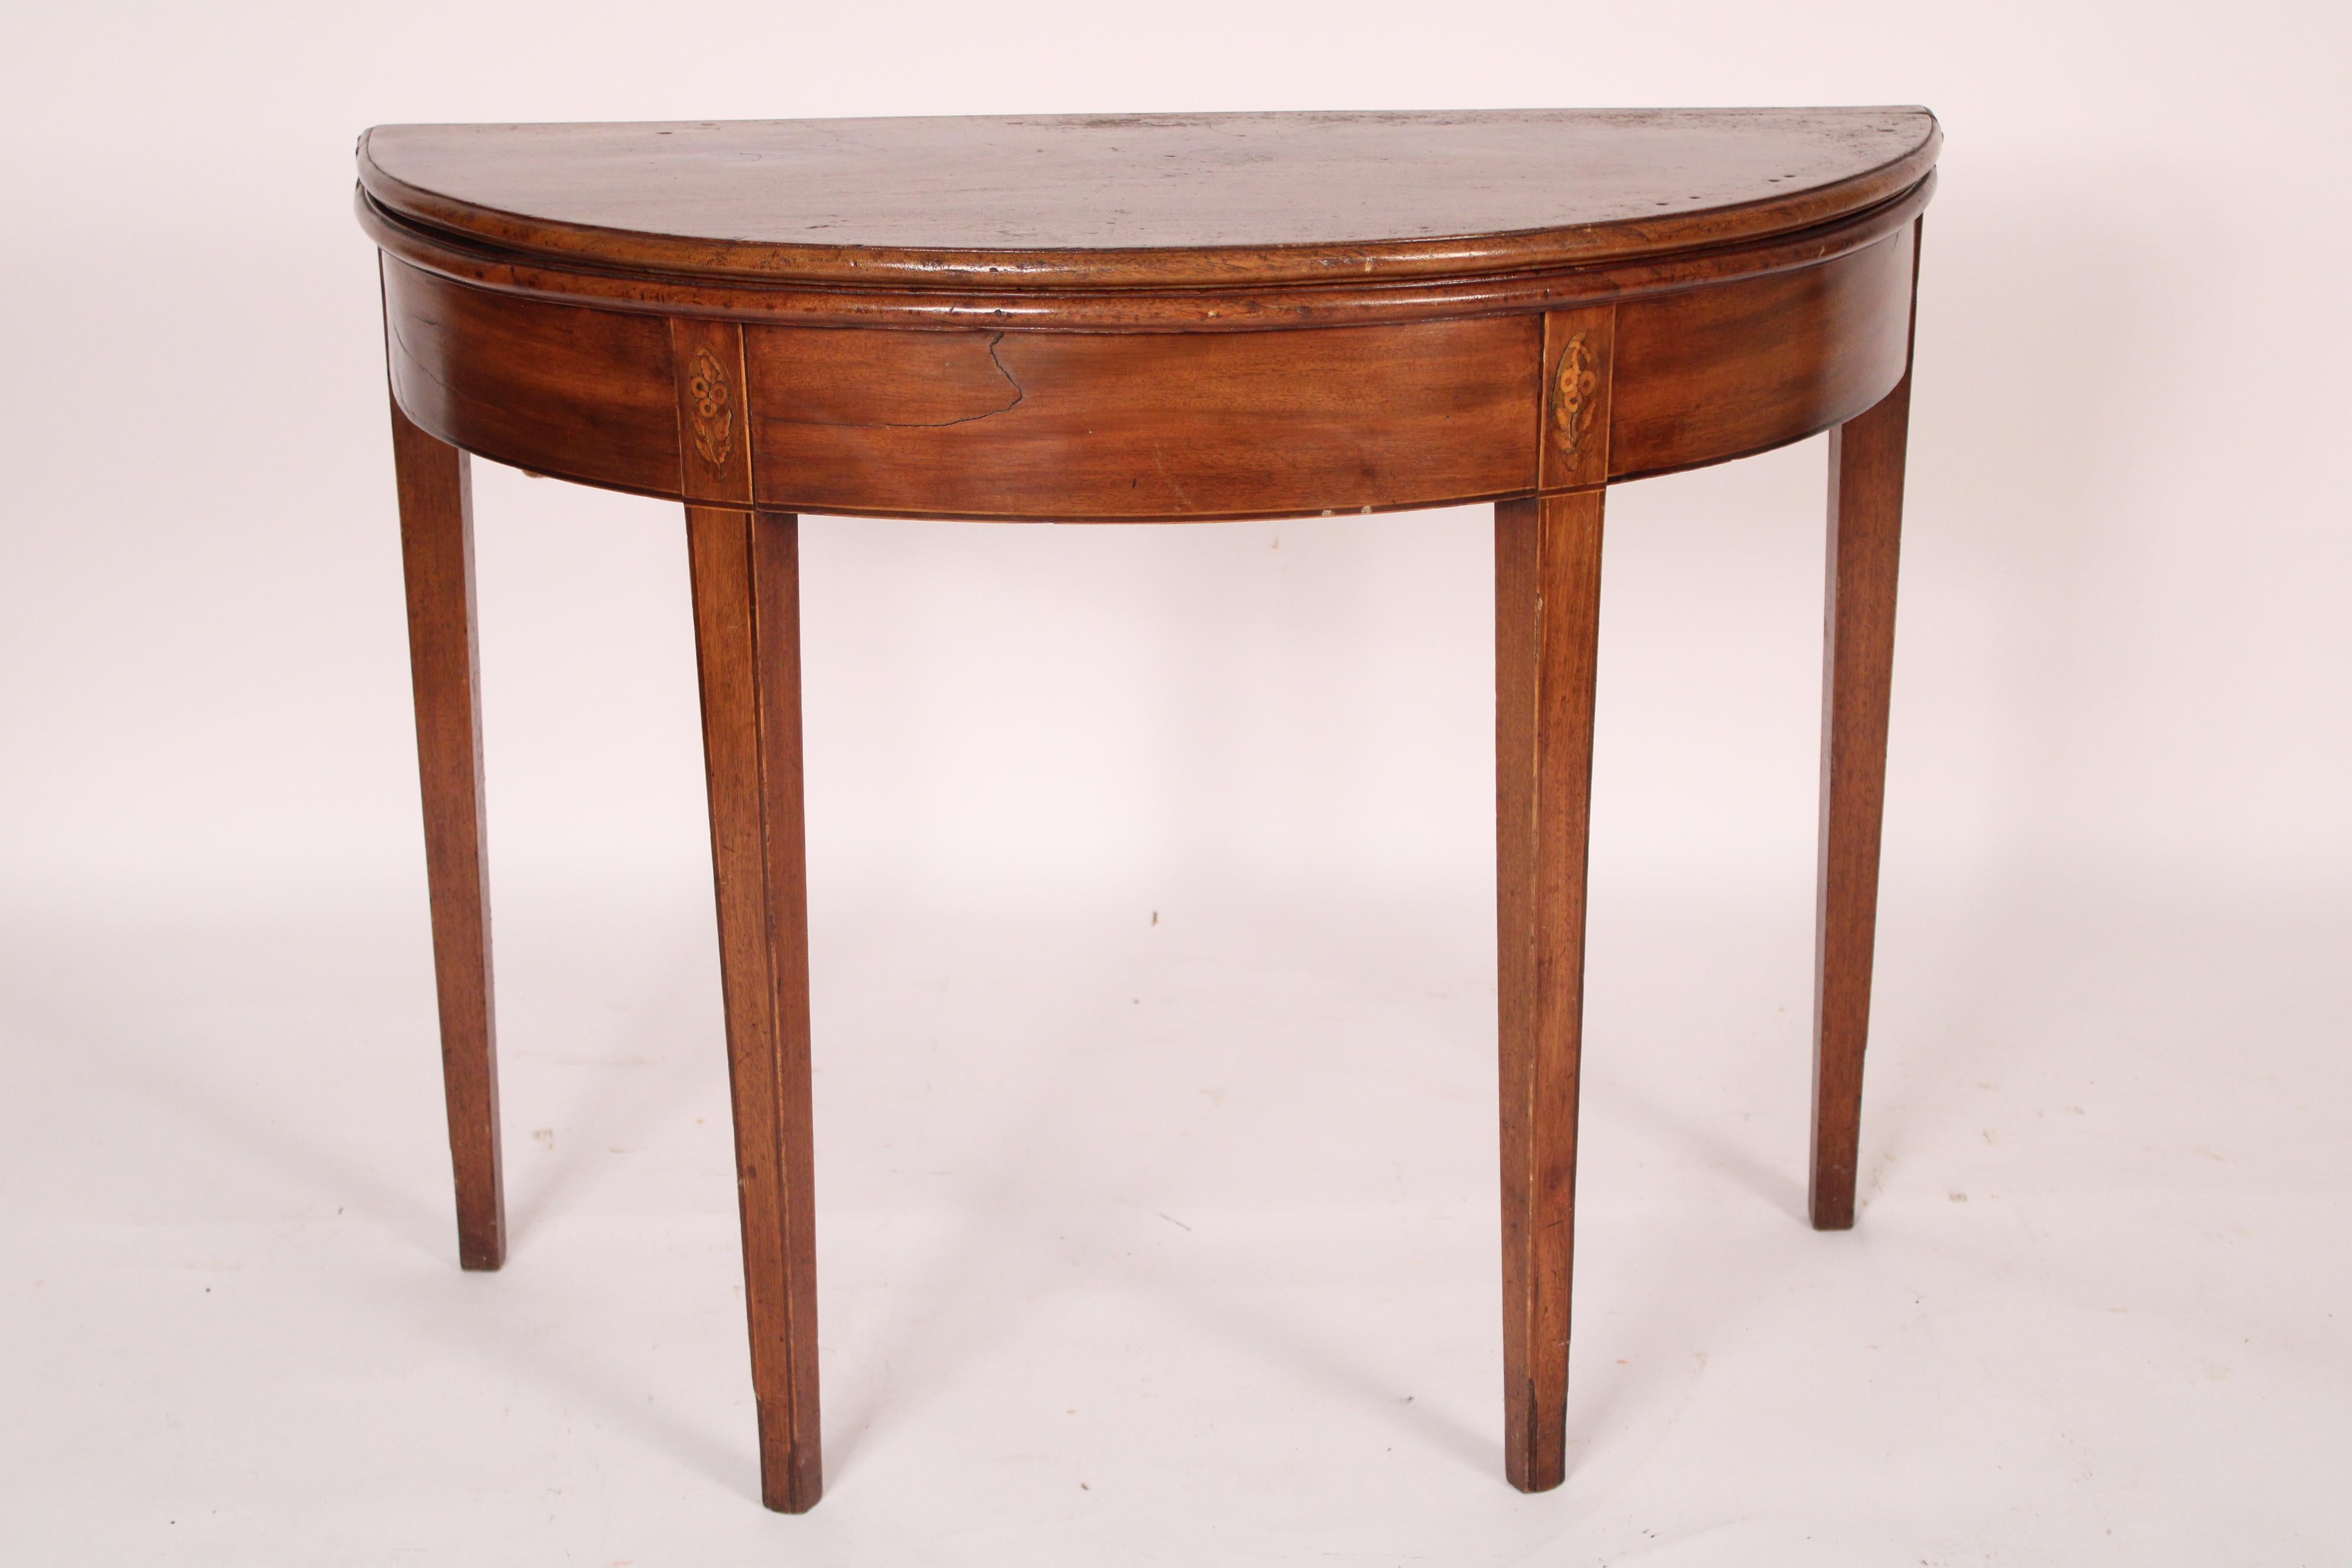 George III mahogany demi lune games table, circa 1800. With a demi lune top with molded edges, demi lune shaped mahogany frieze, front legs with patera inlay at top of legs, legs are square and tapered with line inlay. The two halves of the demi